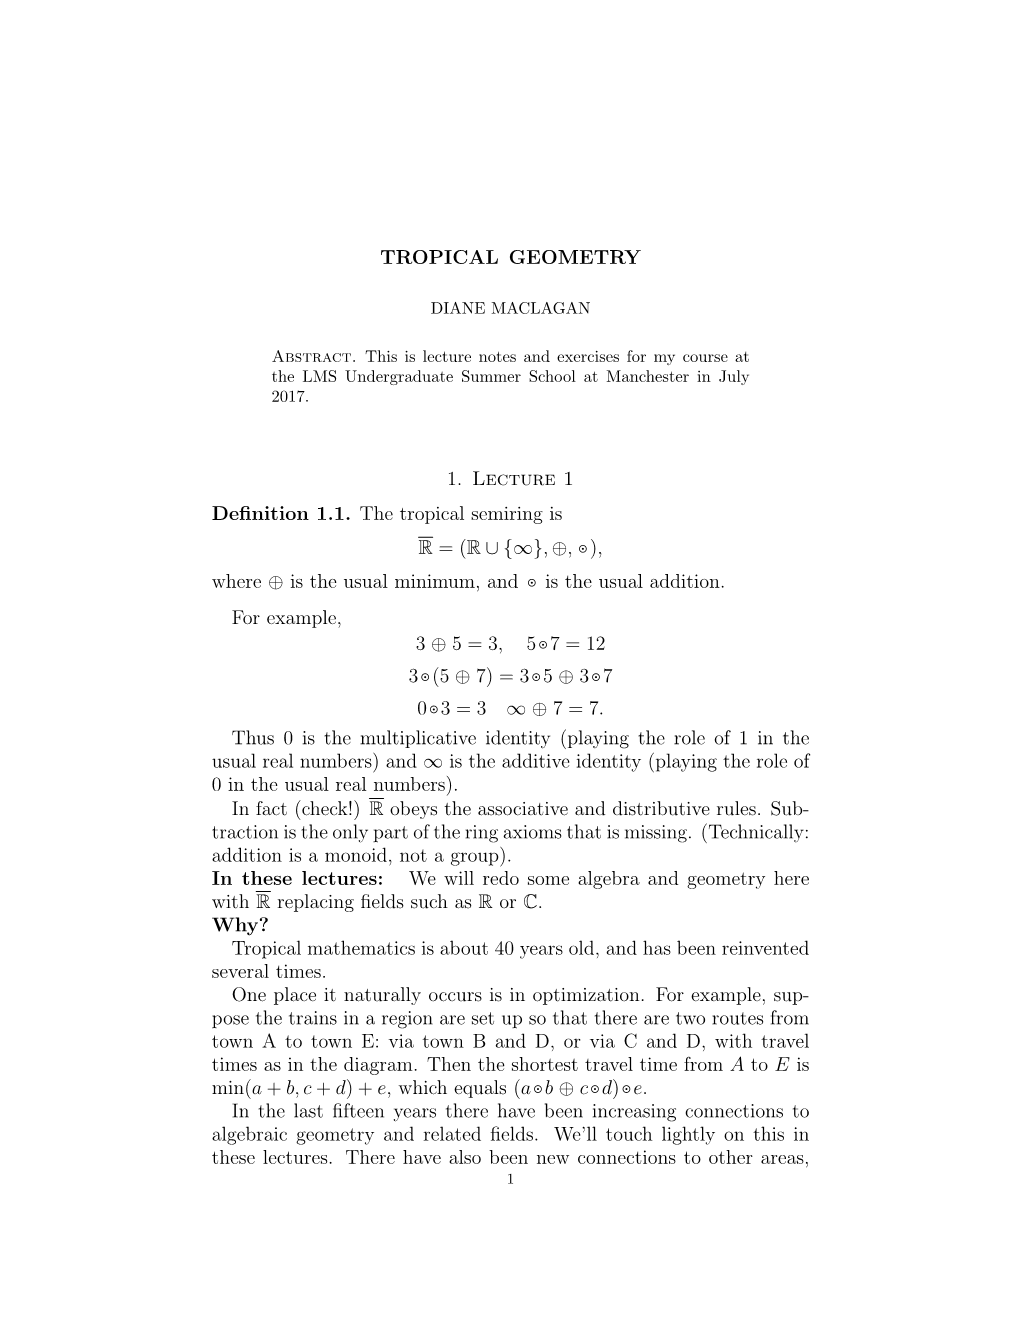 Lecture Notes on Tropical Geometry